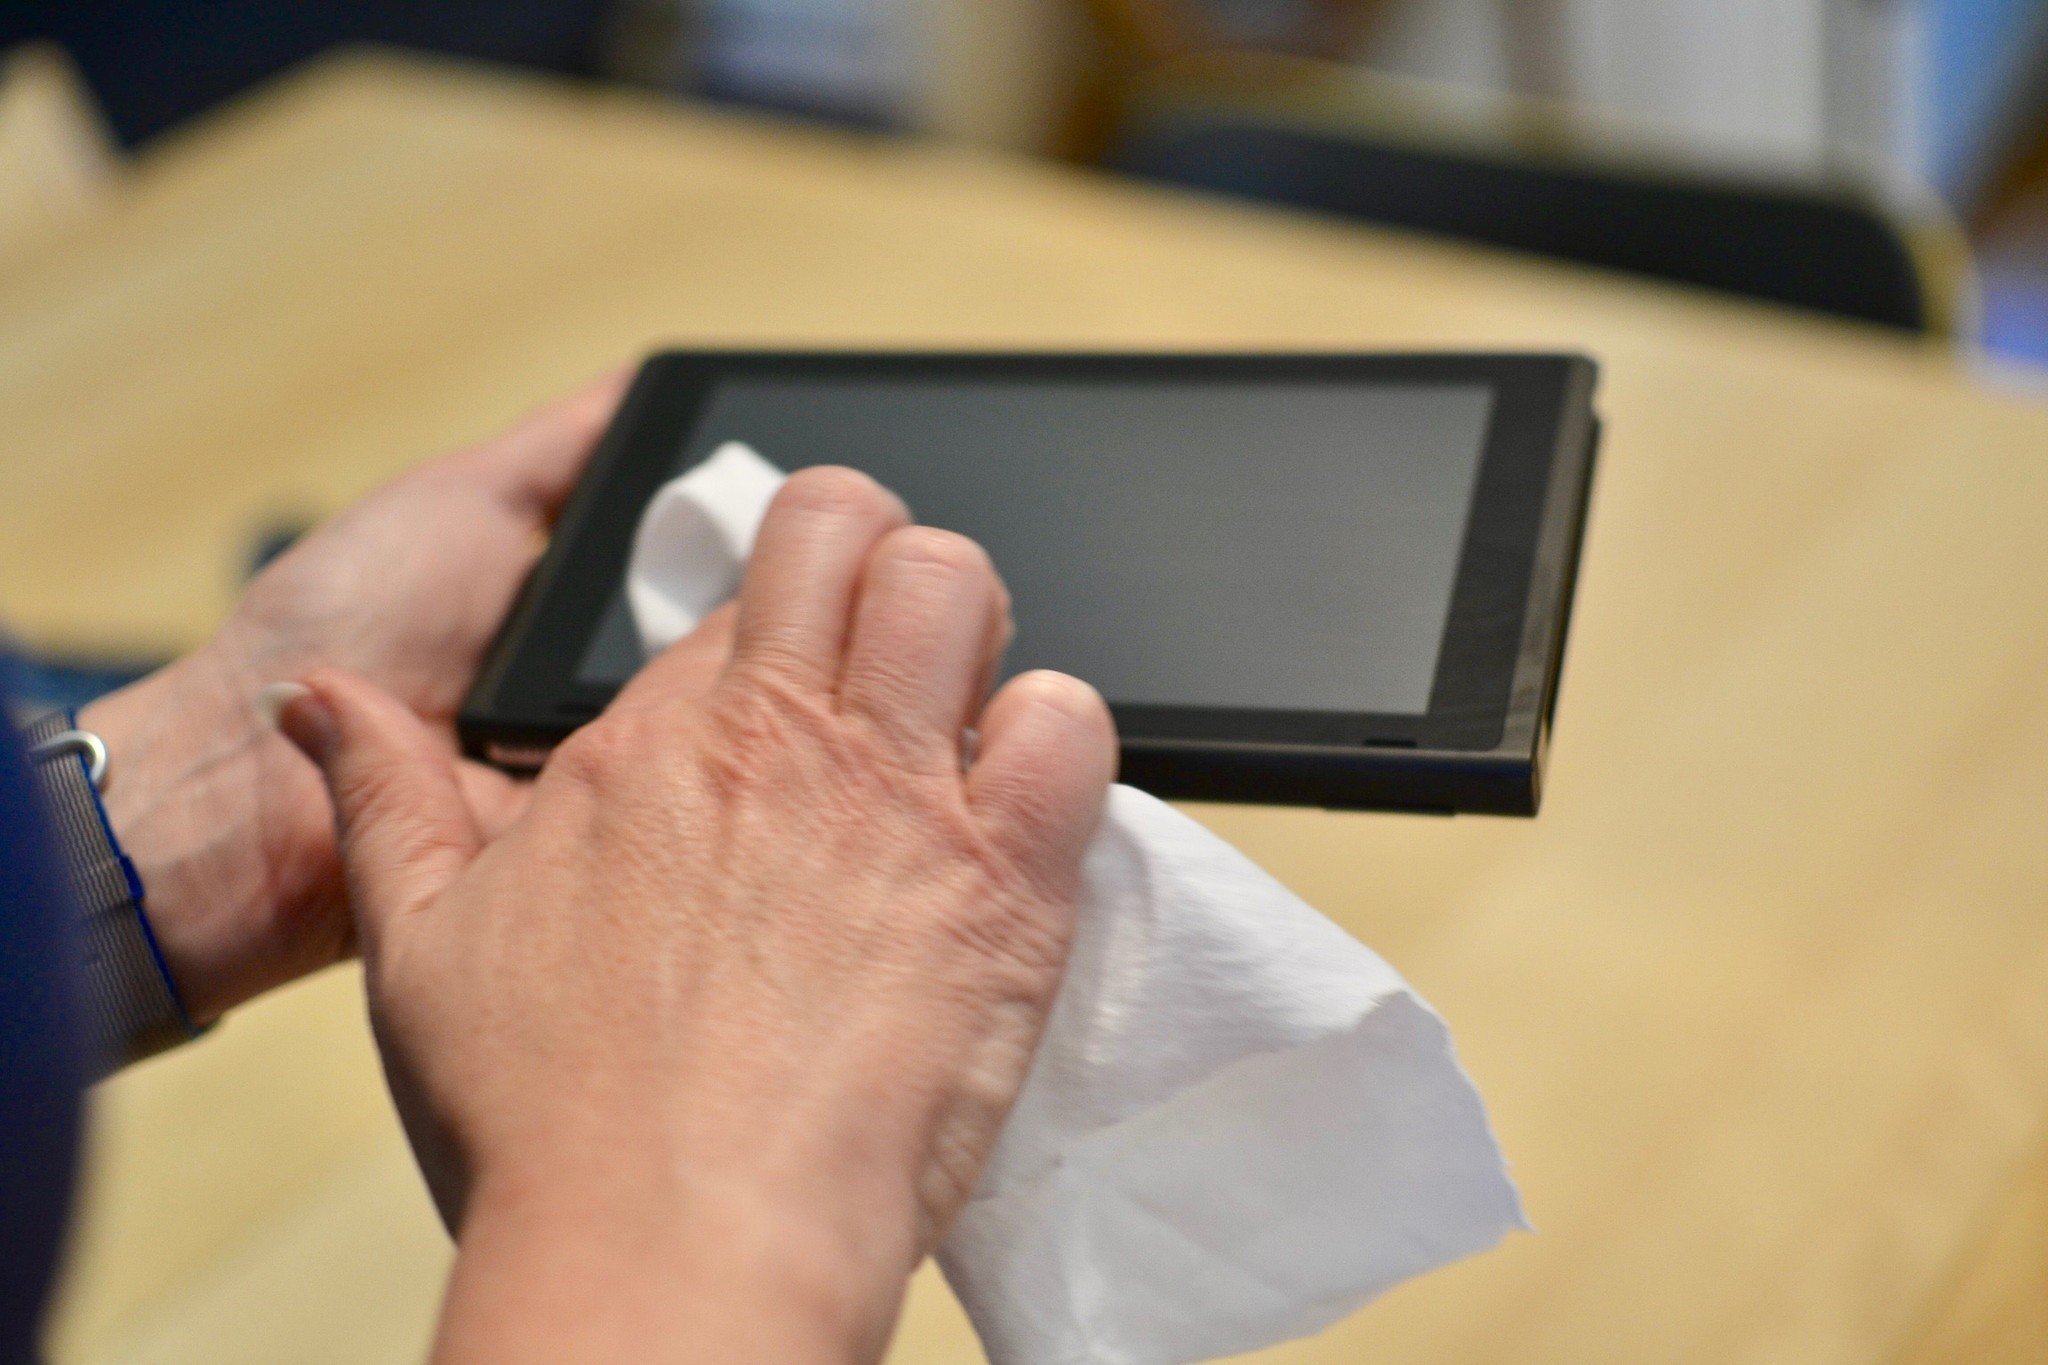 wipe the screen with a soft cloth